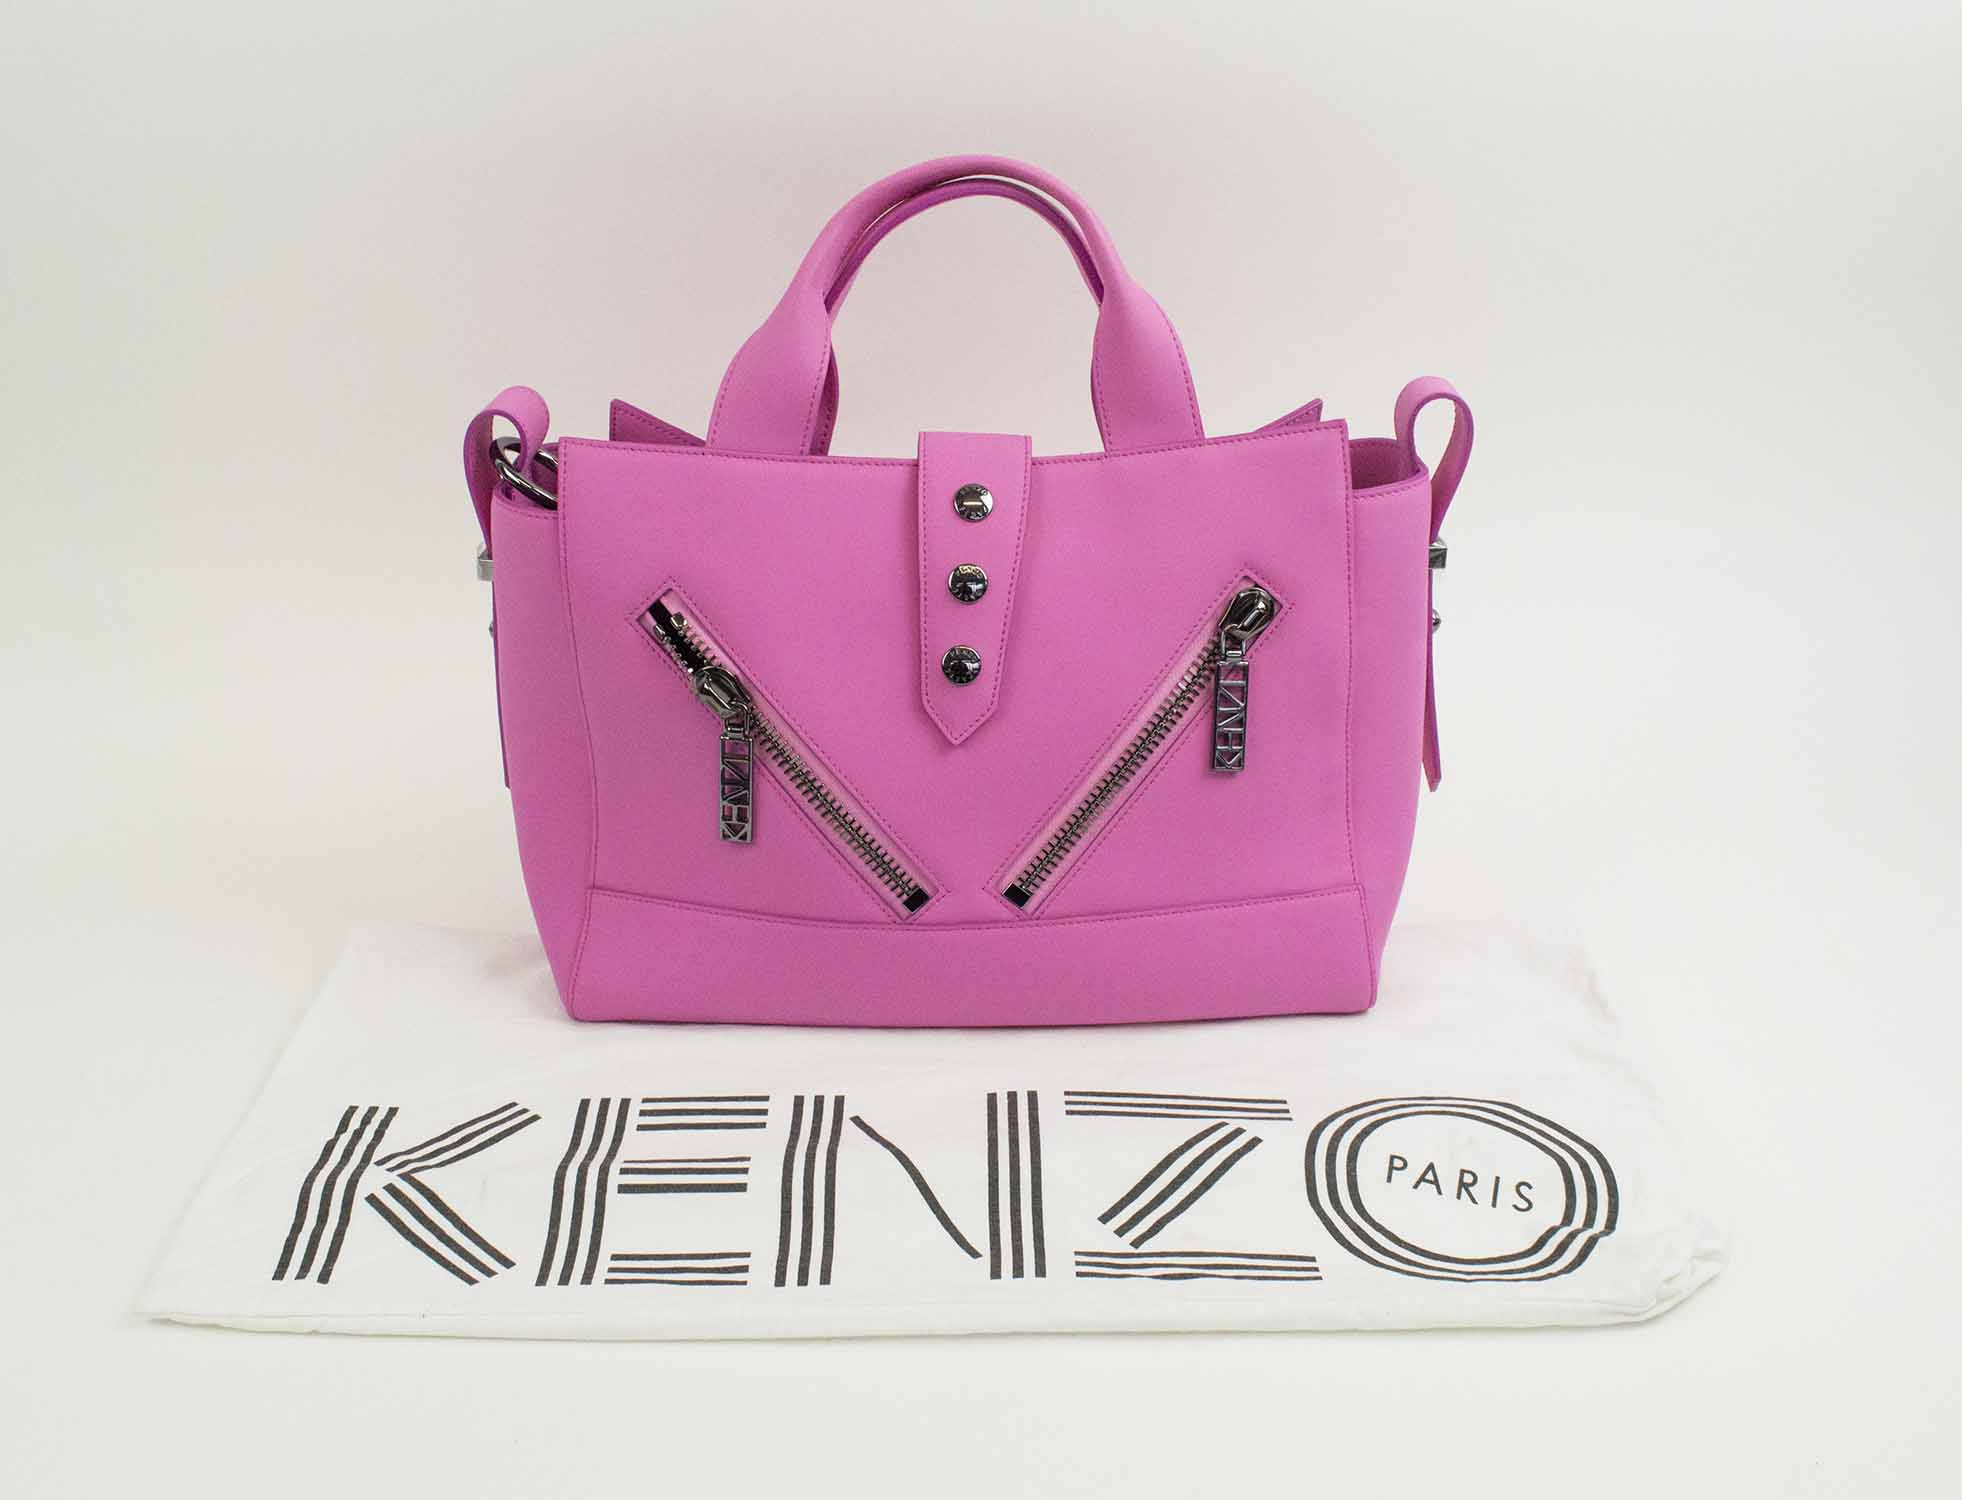 KENZO KALIFORNIA SHOULDER/BAG, in pink gommato waterproof leather, frontal flap  closure with two frontal zips pocket and a further pocket at the back, gun  metal tone hardware, with dust bag, with adjustable